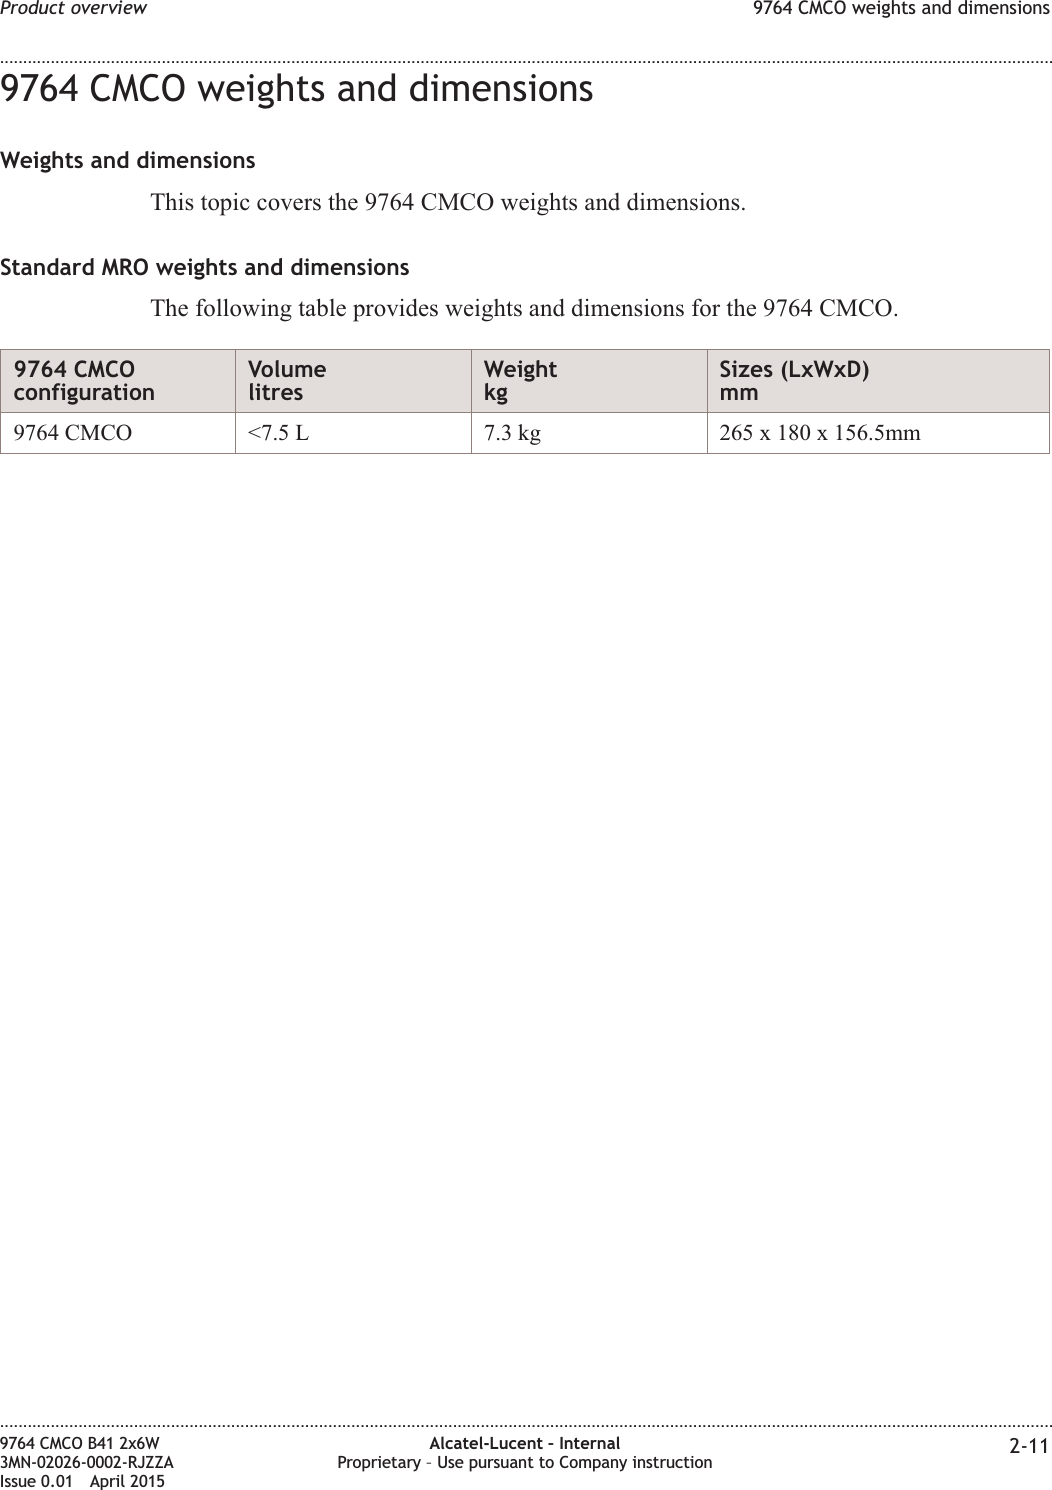 9764 CMCO weights and dimensionsWeights and dimensionsThis topic covers the 9764 CMCO weights and dimensions.Standard MRO weights and dimensionsThe following table provides weights and dimensions for the 9764 CMCO.9764 CMCOconfigurationVolumelitresWeightkgSizes (LxWxD)mm9764 CMCO &lt;7.5 L 7.3 kg 265 x 180 x 156.5mmProduct overview 9764 CMCO weights and dimensions........................................................................................................................................................................................................................................................................................................................................................................................................................................................................9764 CMCO B41 2x6W3MN-02026-0002-RJZZAIssue 0.01 April 2015Alcatel-Lucent – InternalProprietary – Use pursuant to Company instruction 2-11PRELIMINARYPRELIMINARY